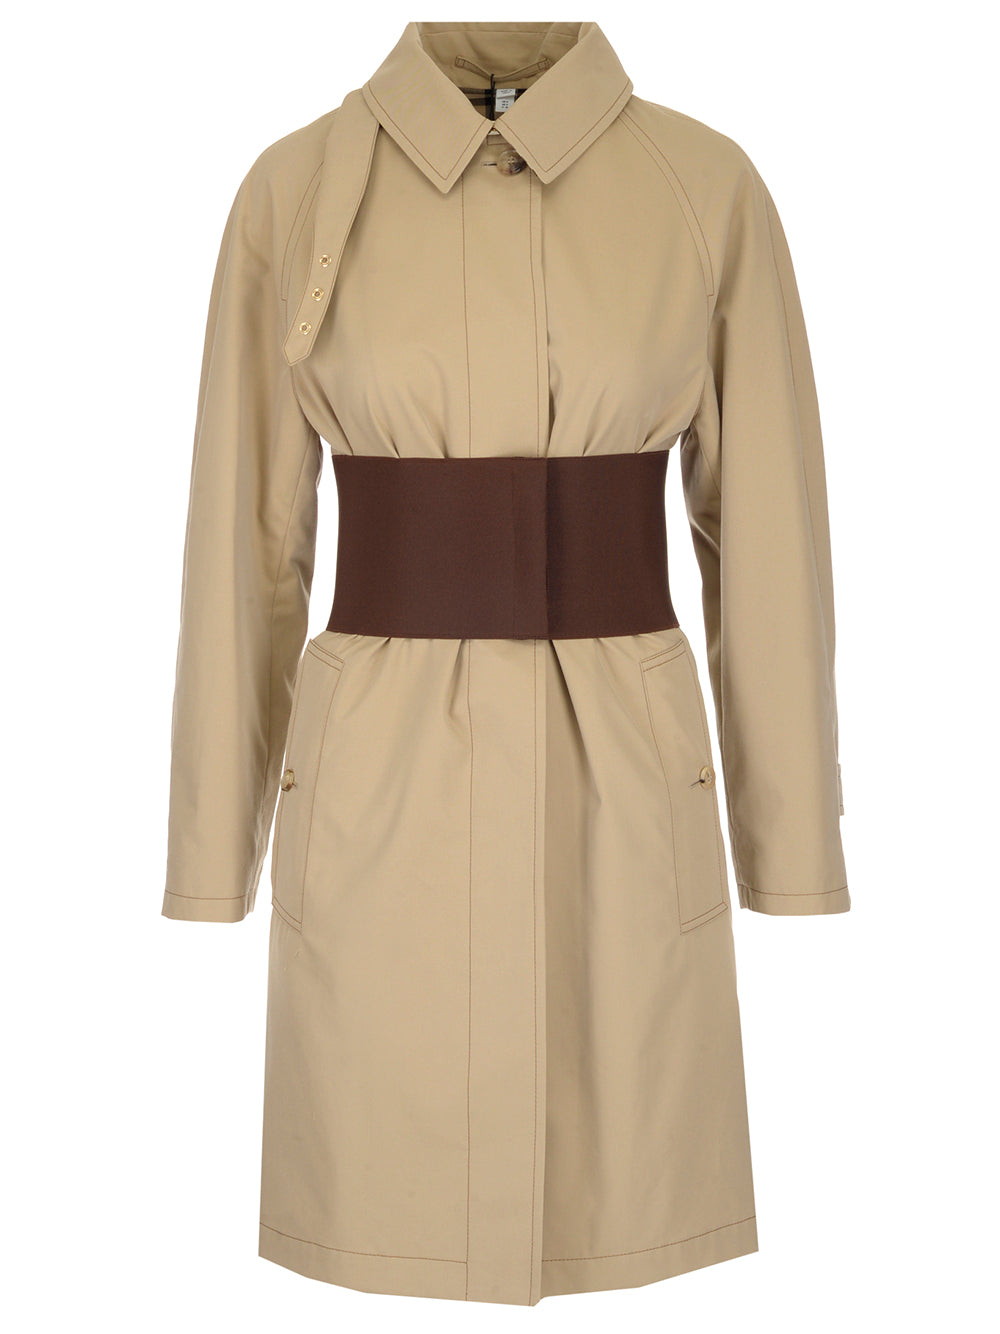 BURBERRY BURBERRY CORSET BELTED TRENCH COAT